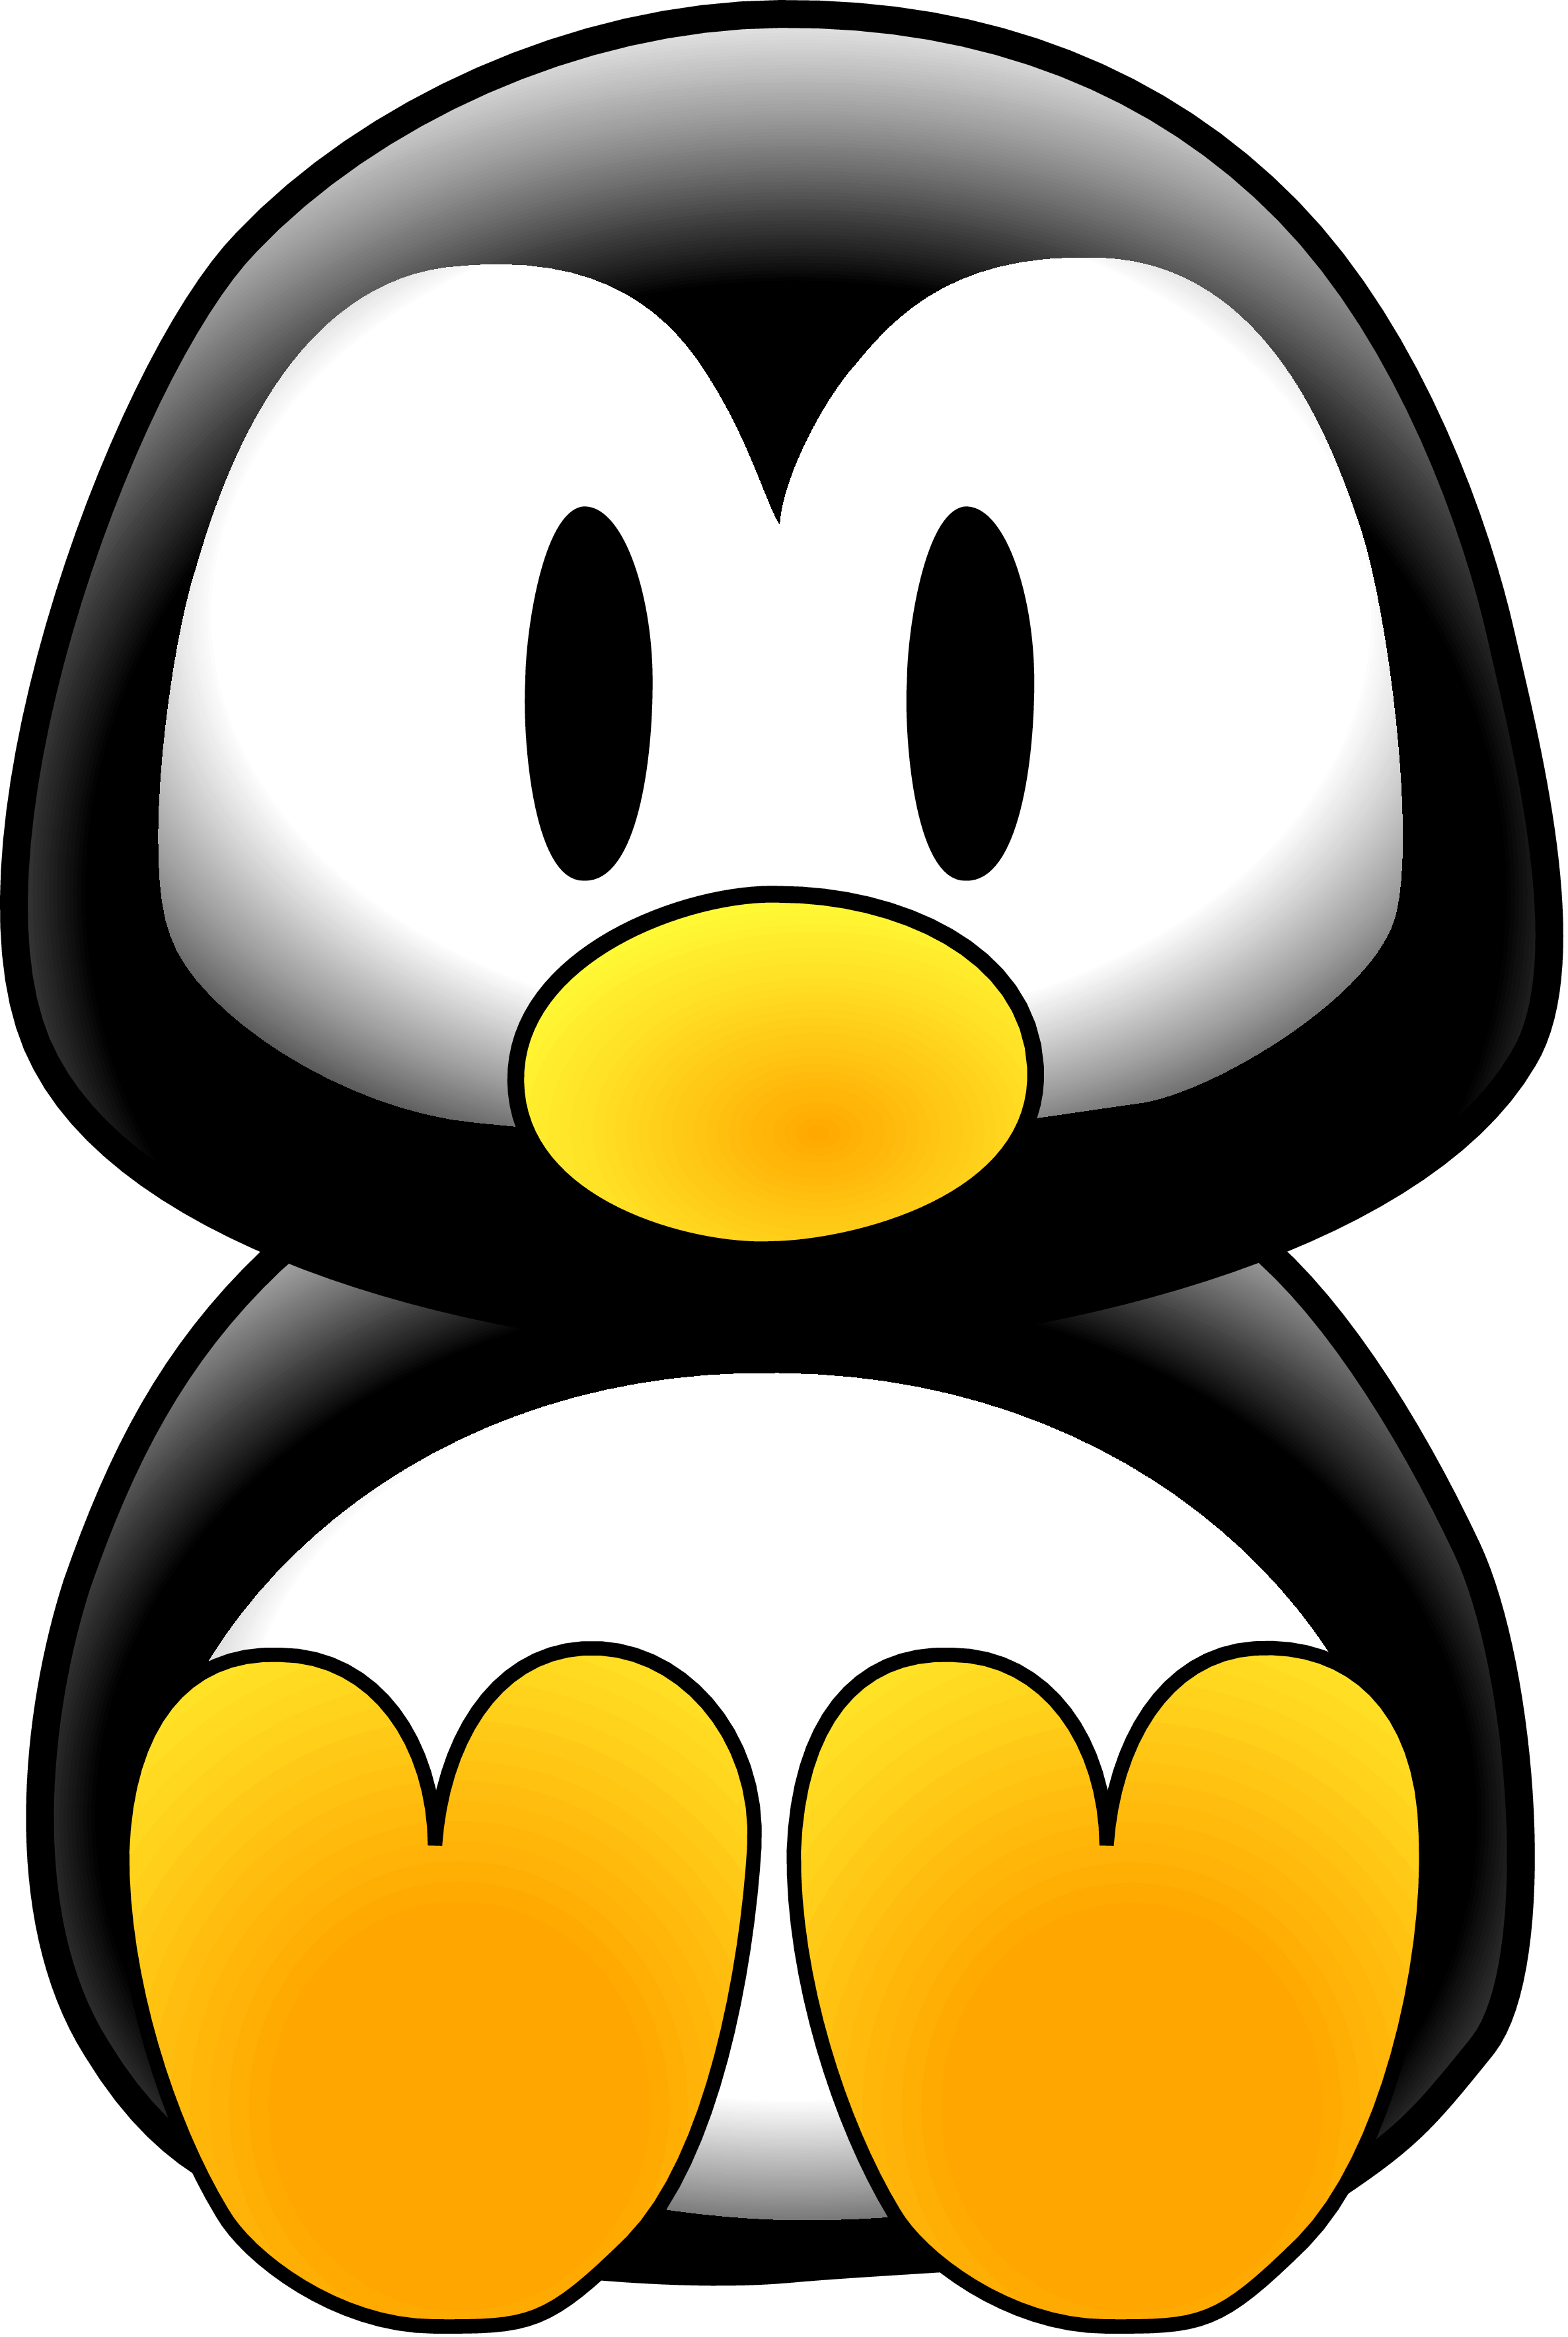 Baby penguin free images. Dictionary clipart walking